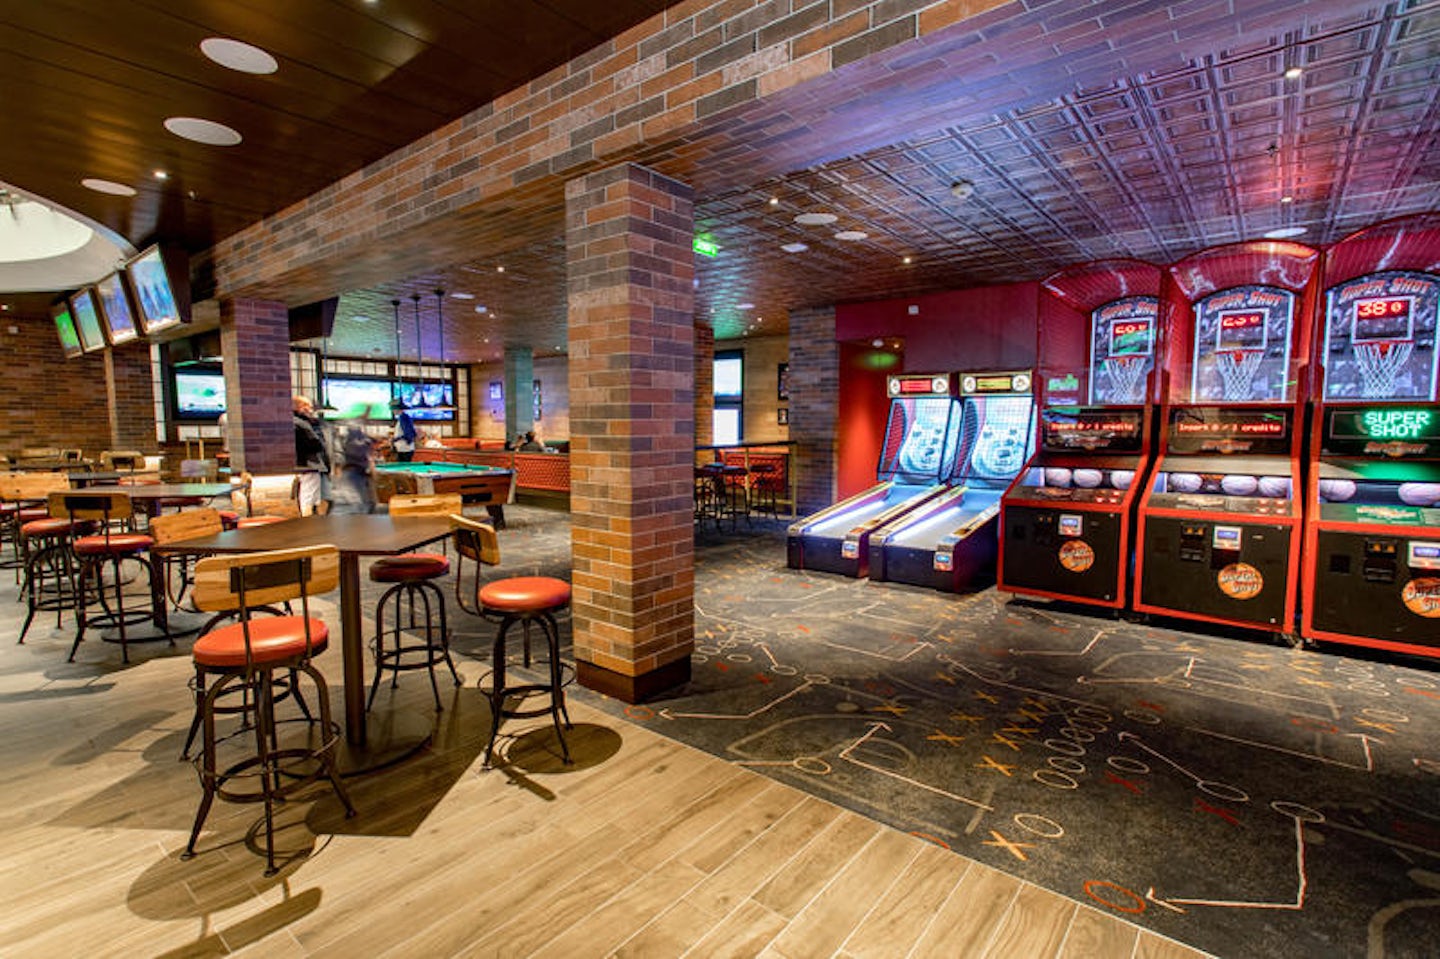 Playmakers Sports Bar & Arcade on Independence of the Seas